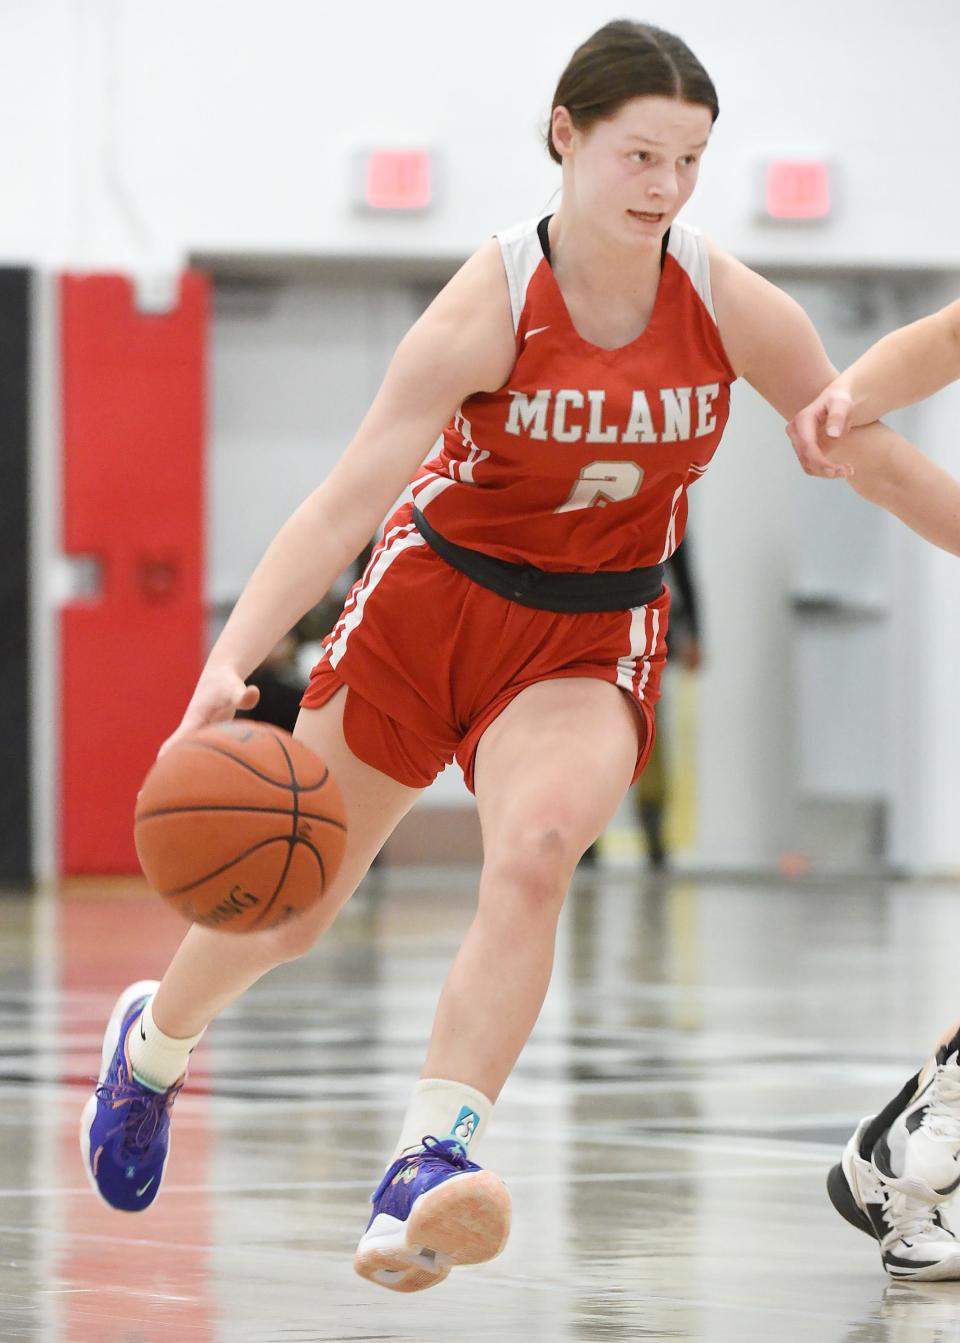 General McLane High School sophomore Libby Opp competes against Seneca during the inaugural ECL Classic basketball tournament at Fairview High School on Thursday.